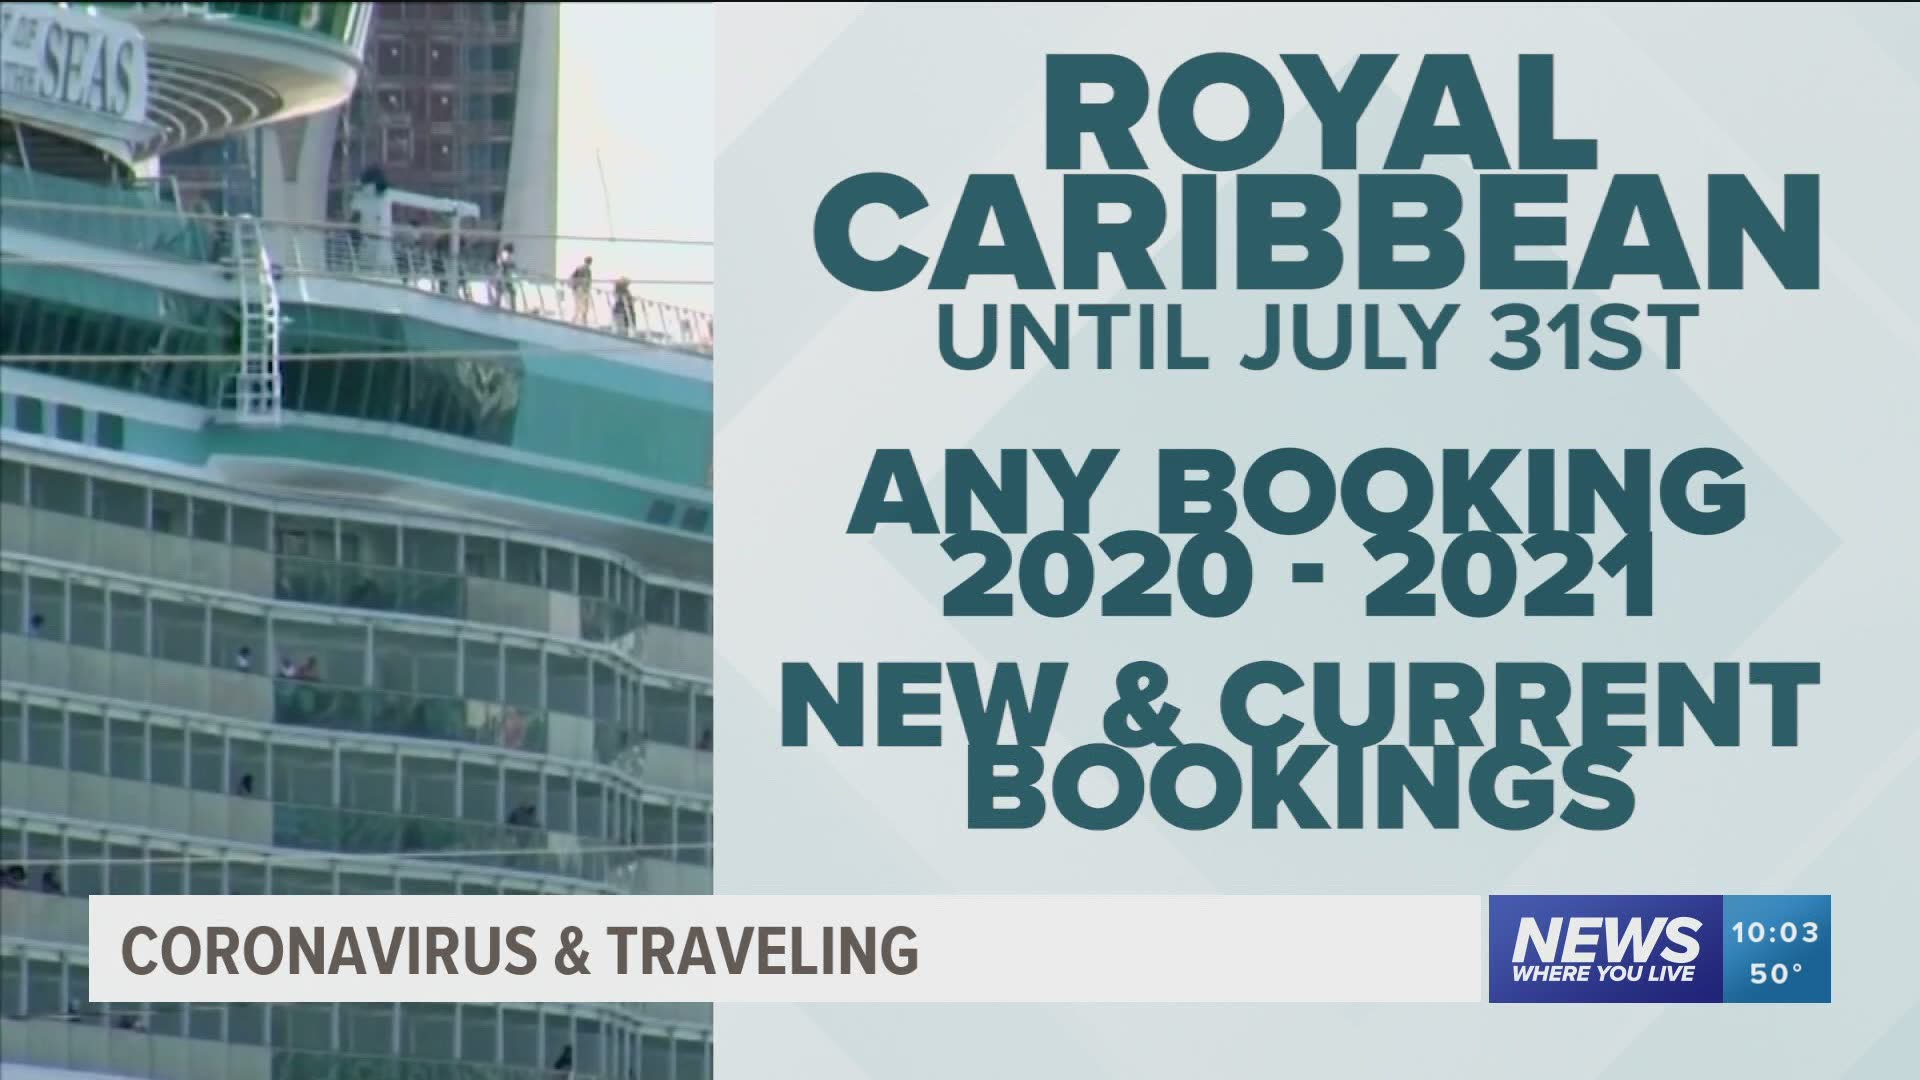 Coronavirus: Worried about your cruise? These cruise lines will let you reschedule